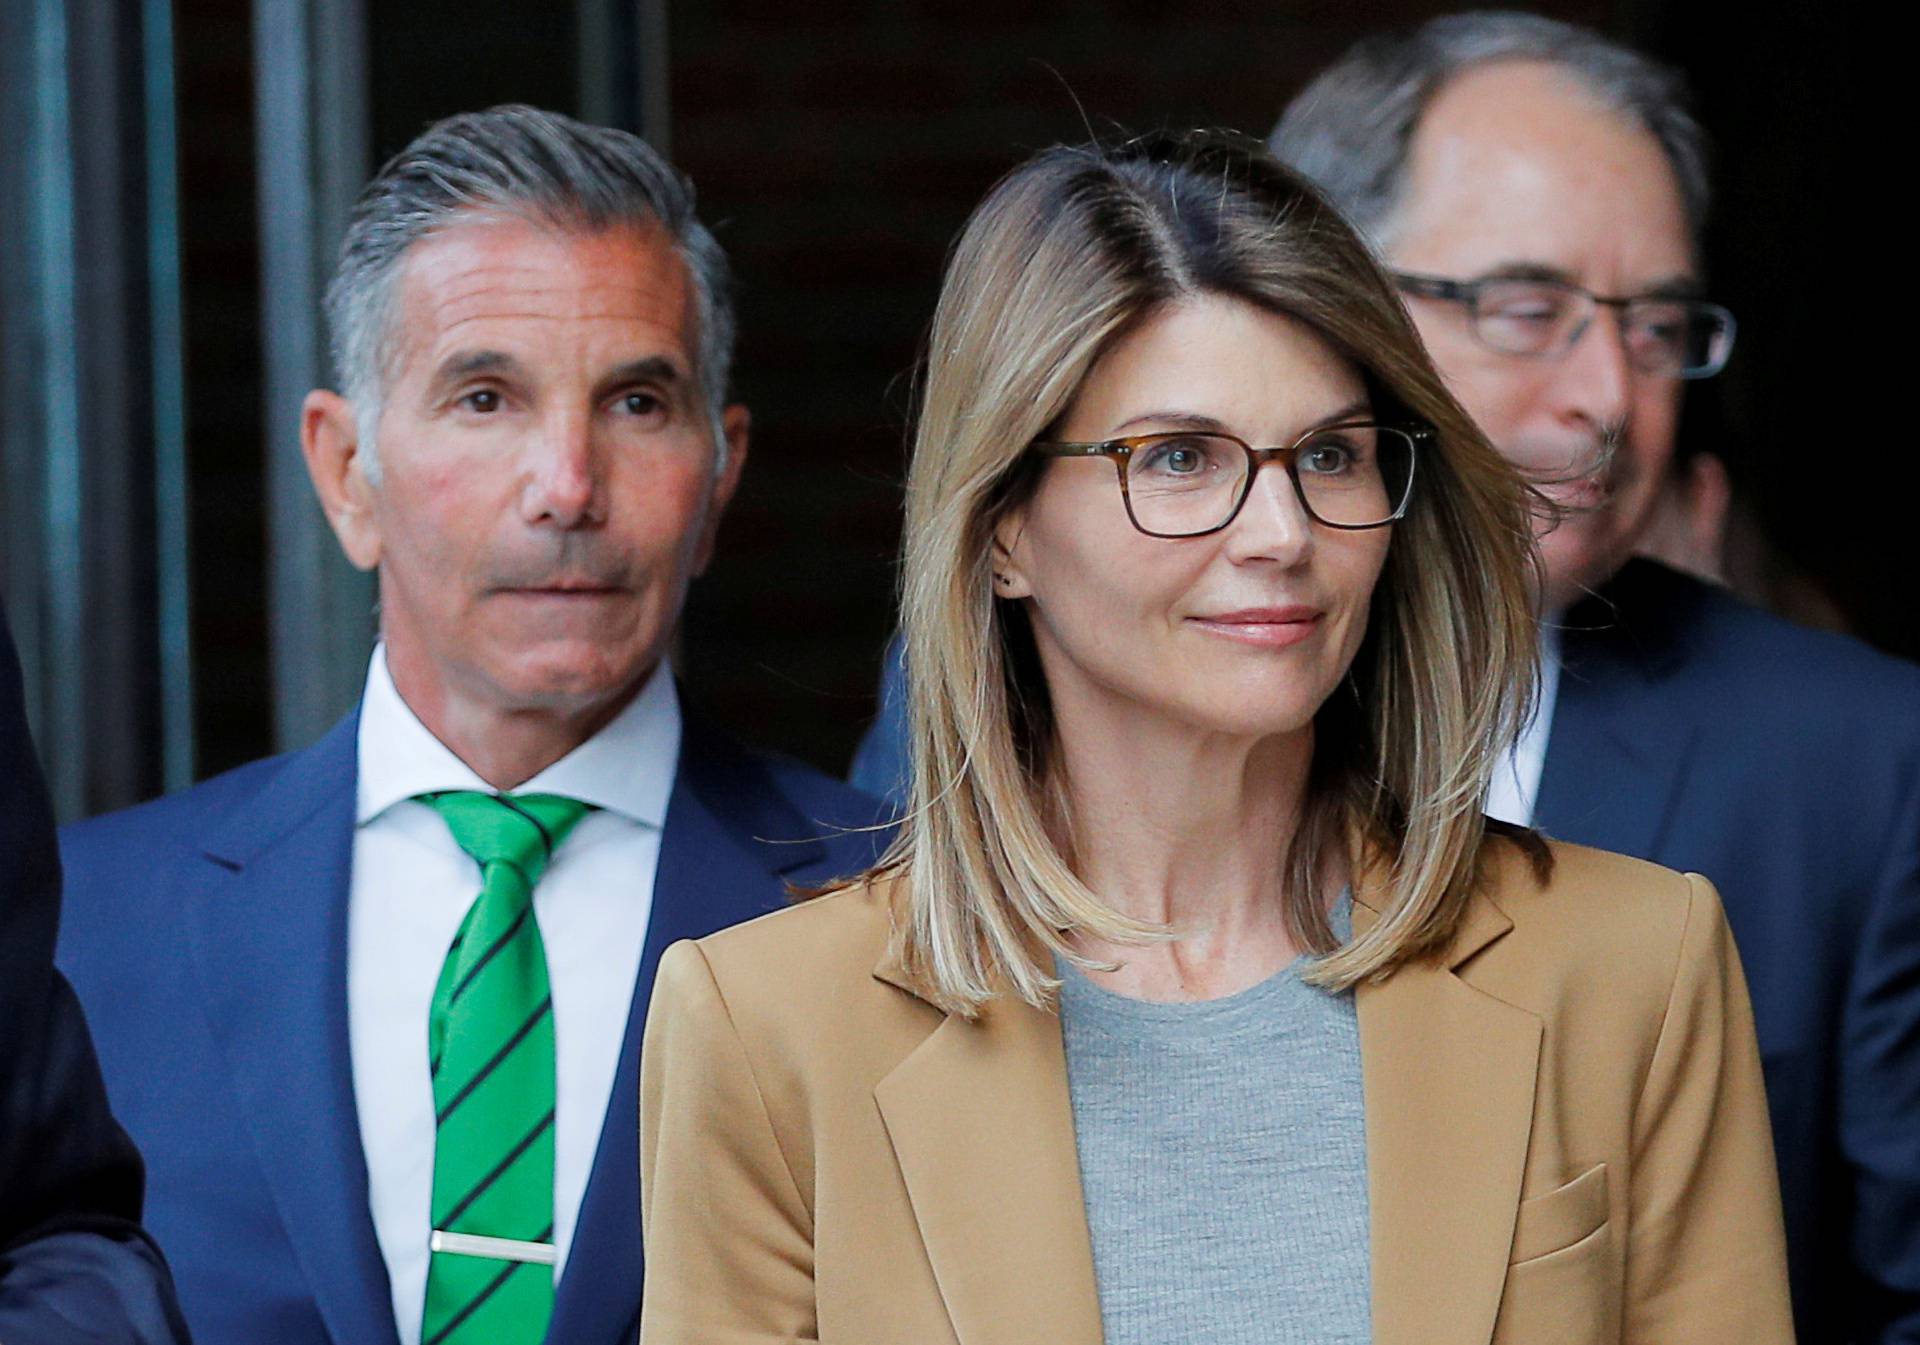 FILE PHOTO: Actor Lori Loughlin and her husband Mossimo Giannulli leave the federal courthouse in Boston